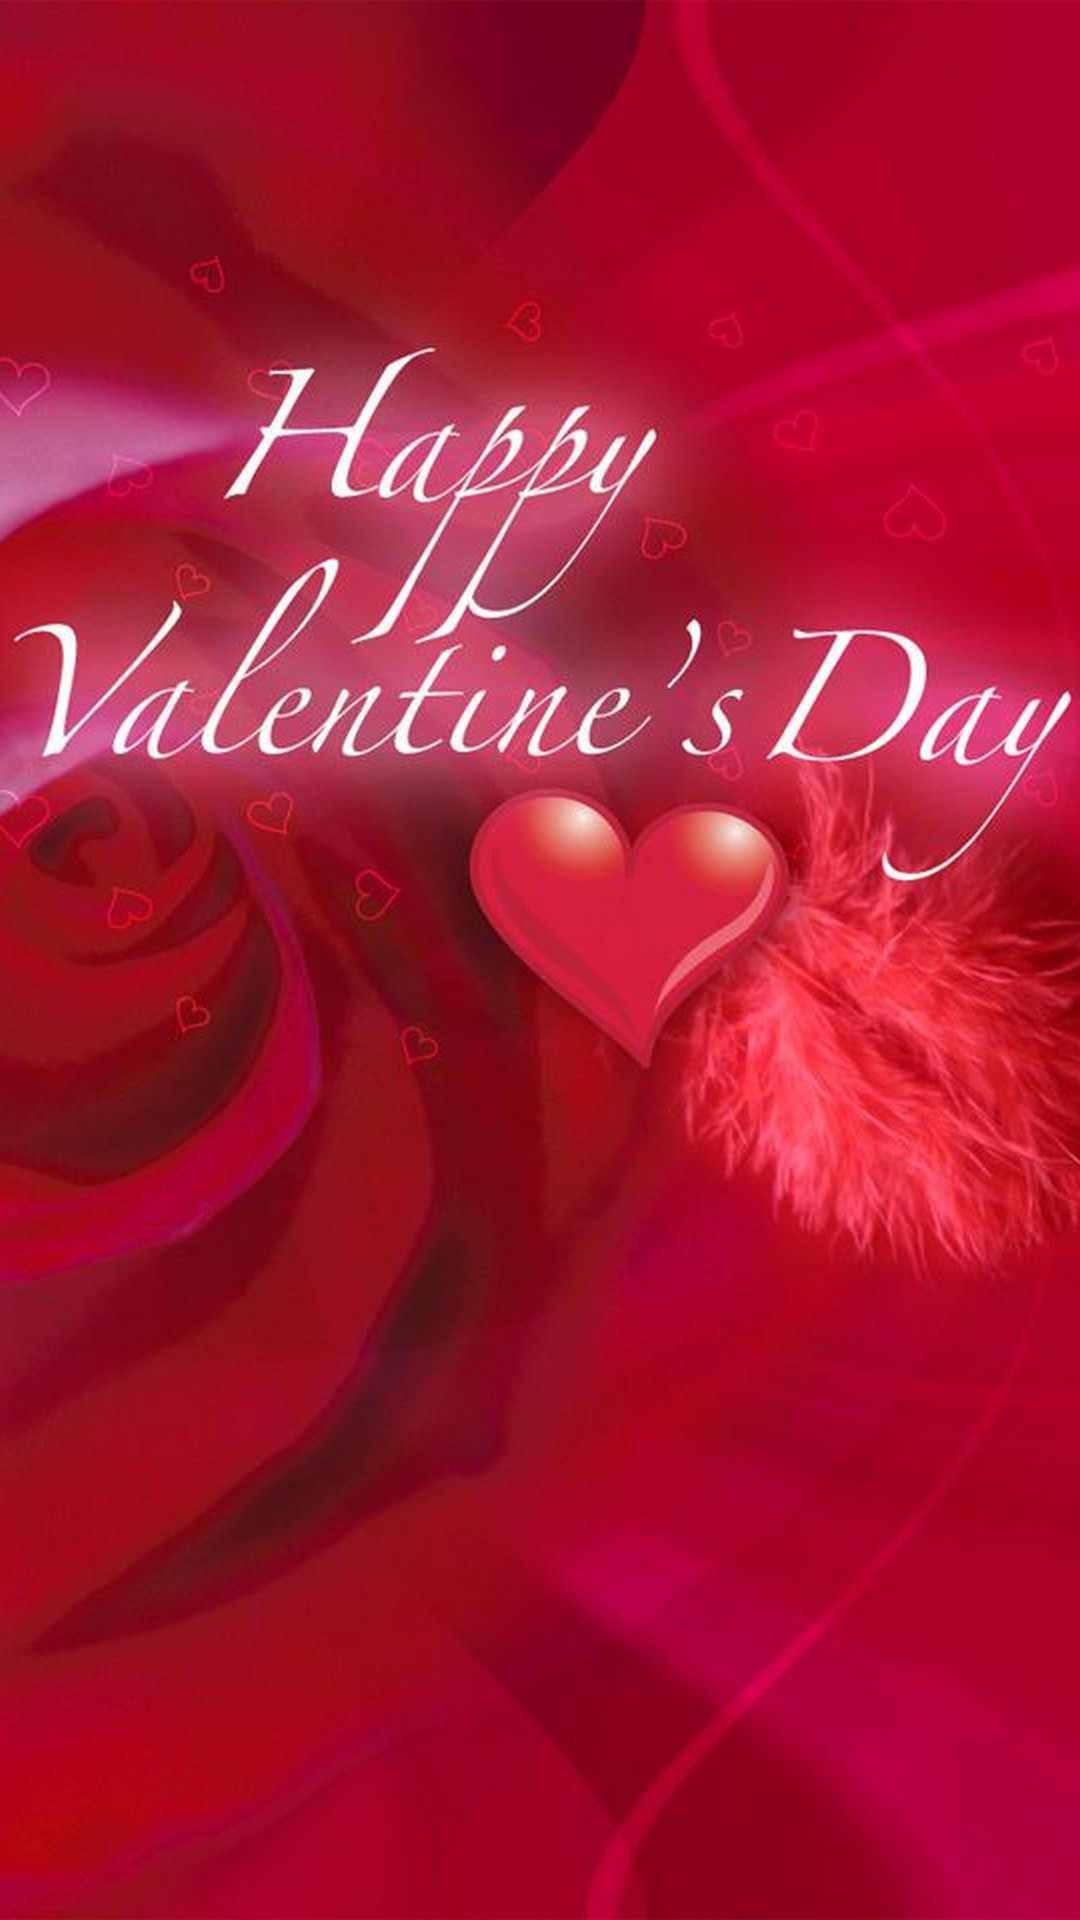 Happy Valentines Day Images with HD resolution 1080x1920